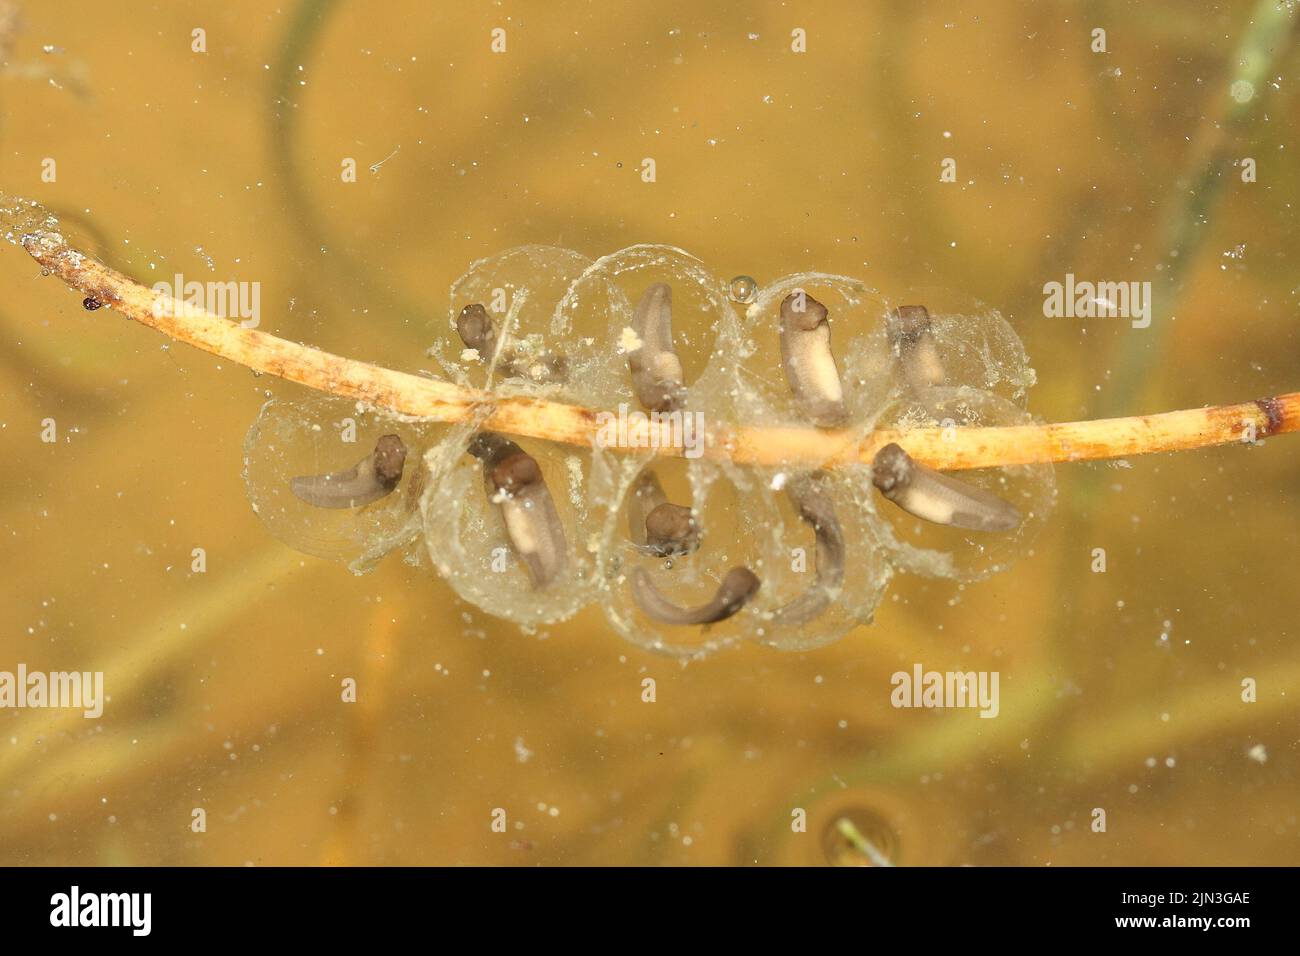 The yellow-bellied toad (Bombina variegata) clutch of eggs with small embryos in the water Stock Photo